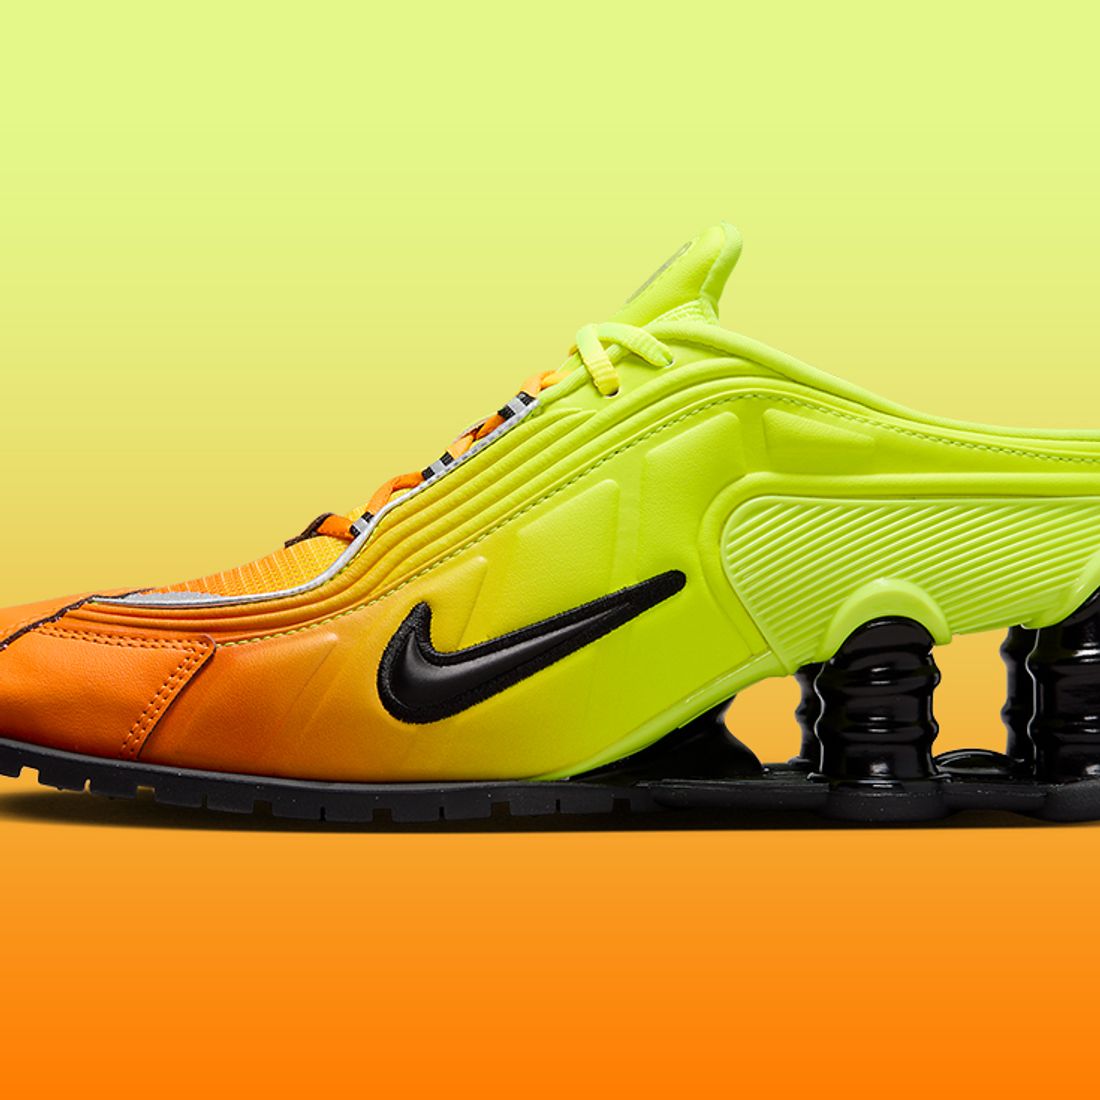 Martine Rose x Nike Shox MR4 Gets Second Release